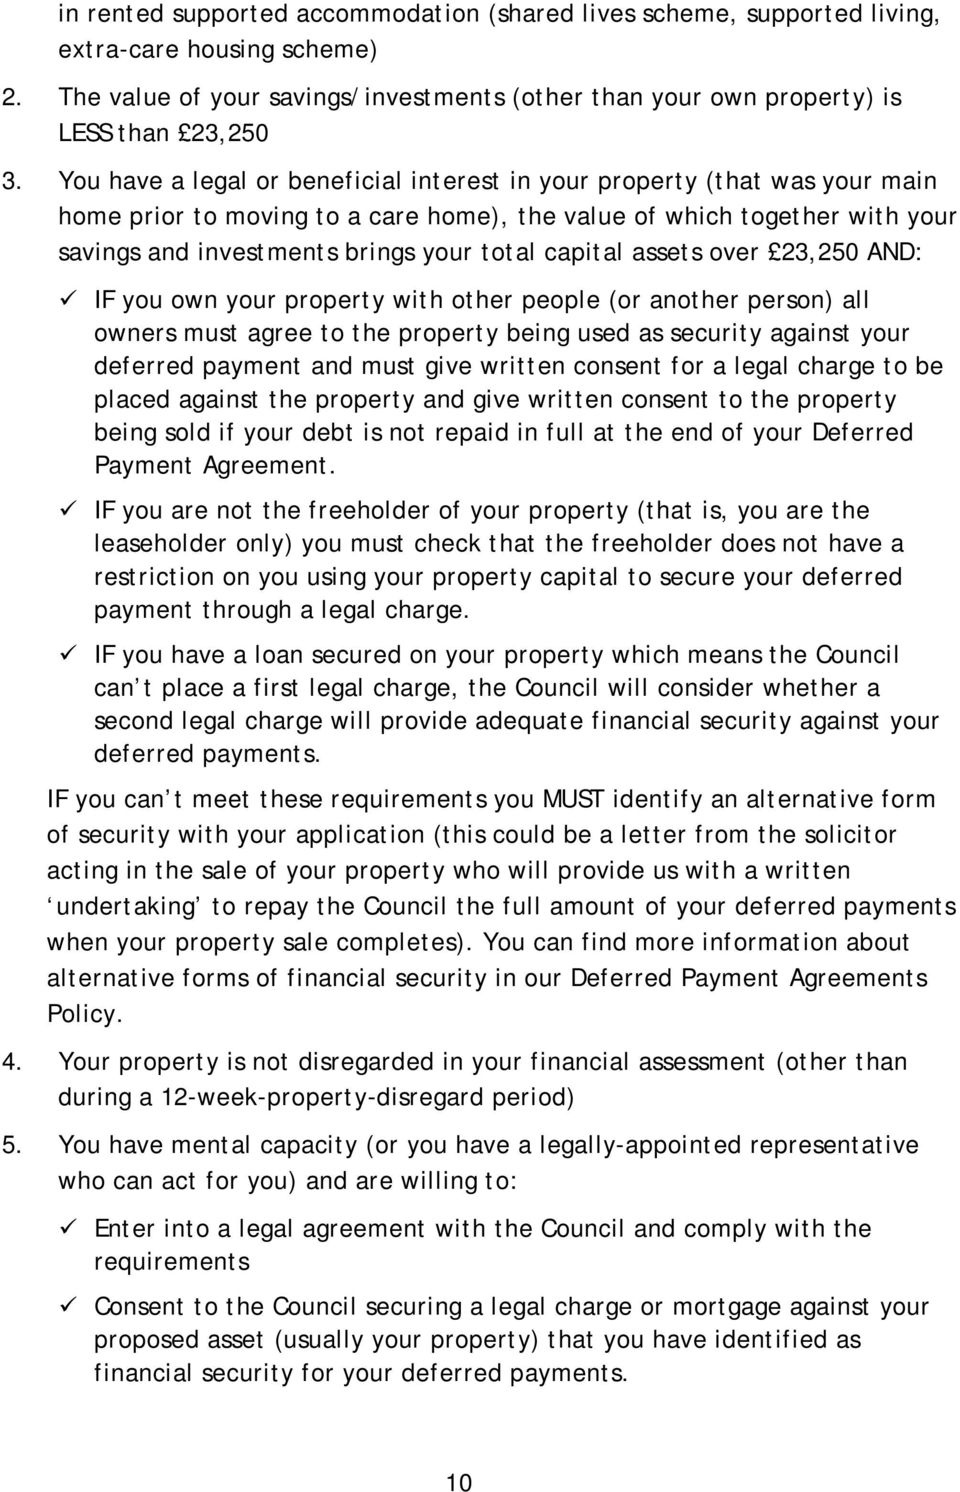 capital assets over 23,250 AND: IF you own your property with other people (or another person) all owners must agree to the property being used as security against your deferred payment and must give